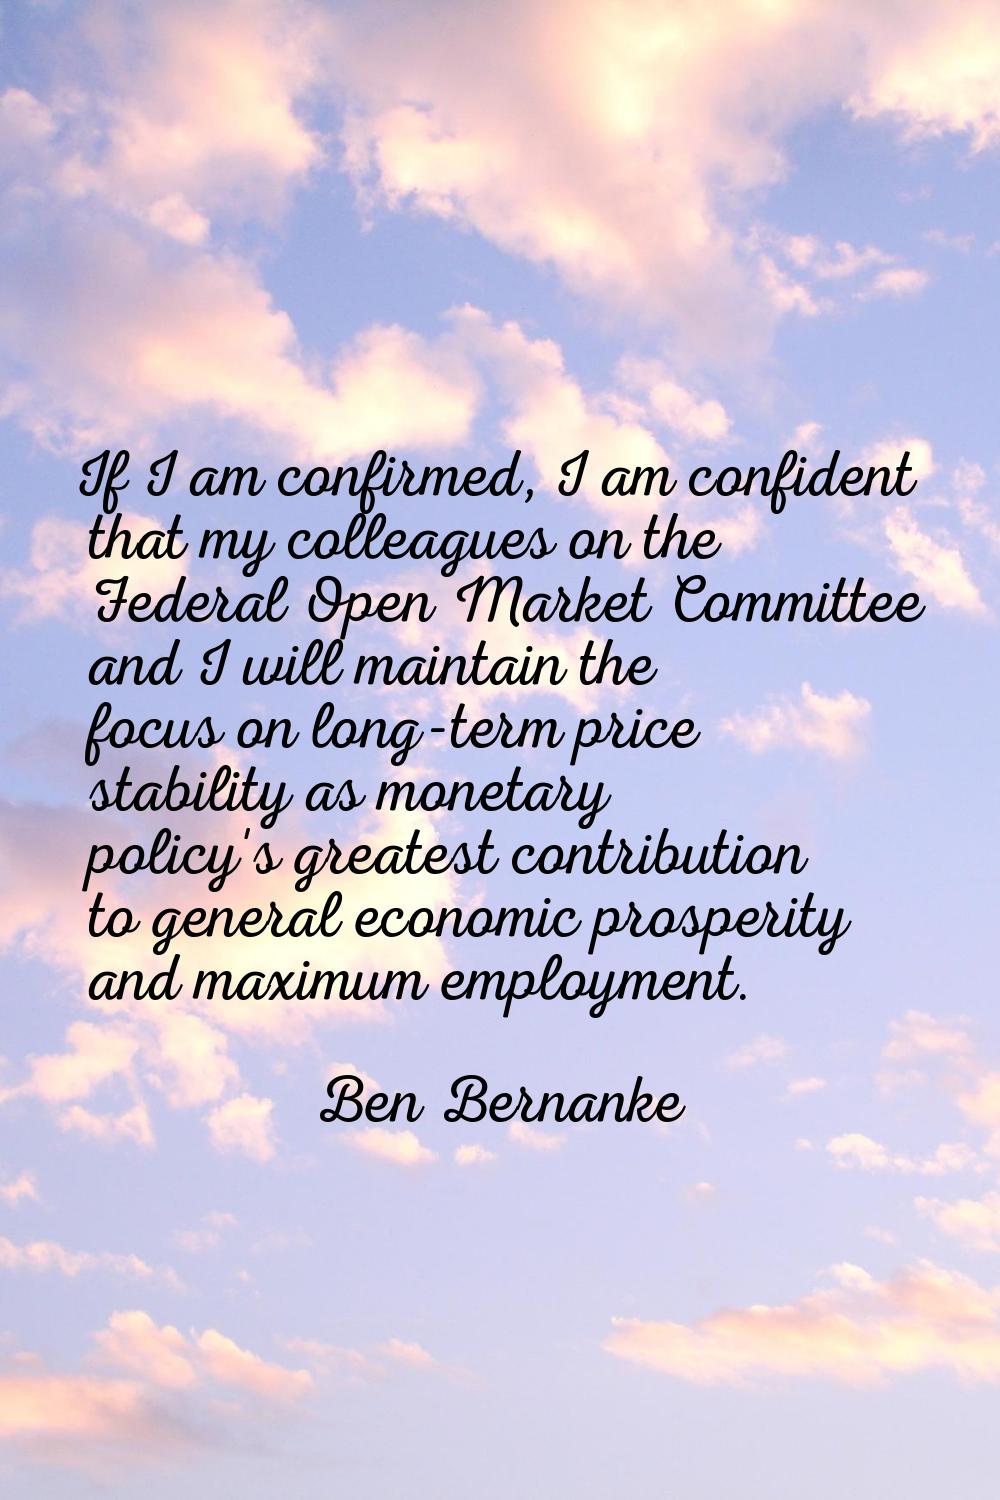 If I am confirmed, I am confident that my colleagues on the Federal Open Market Committee and I wil